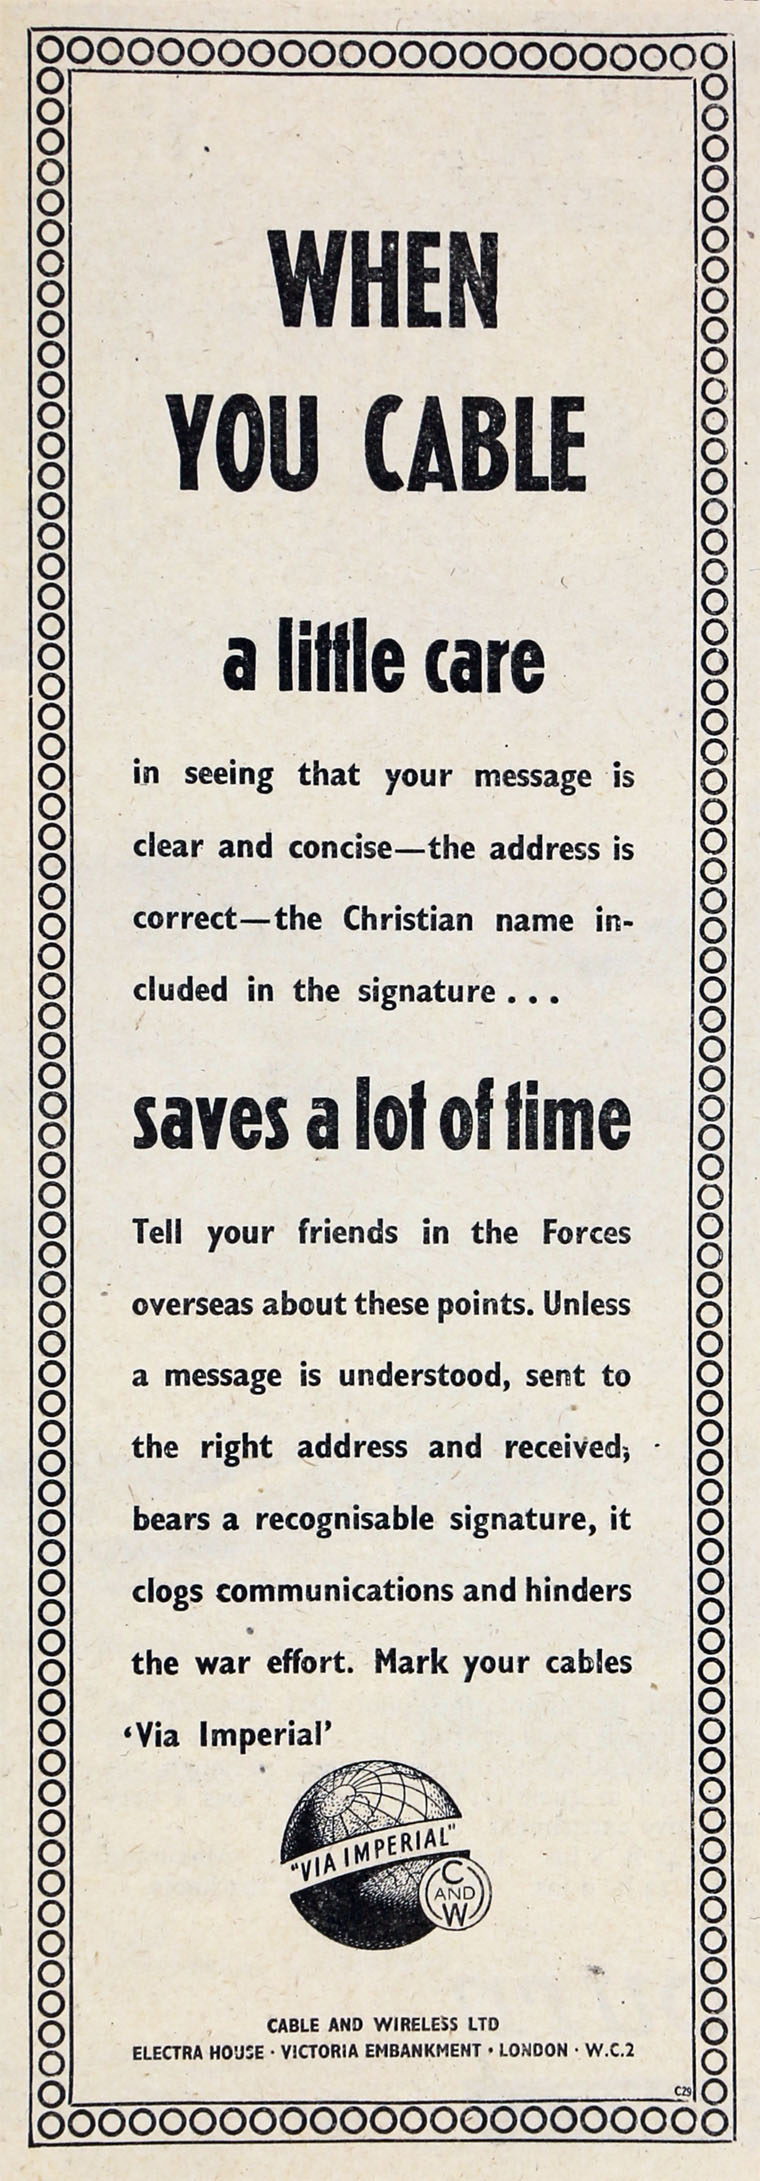 Wartime request for clarity